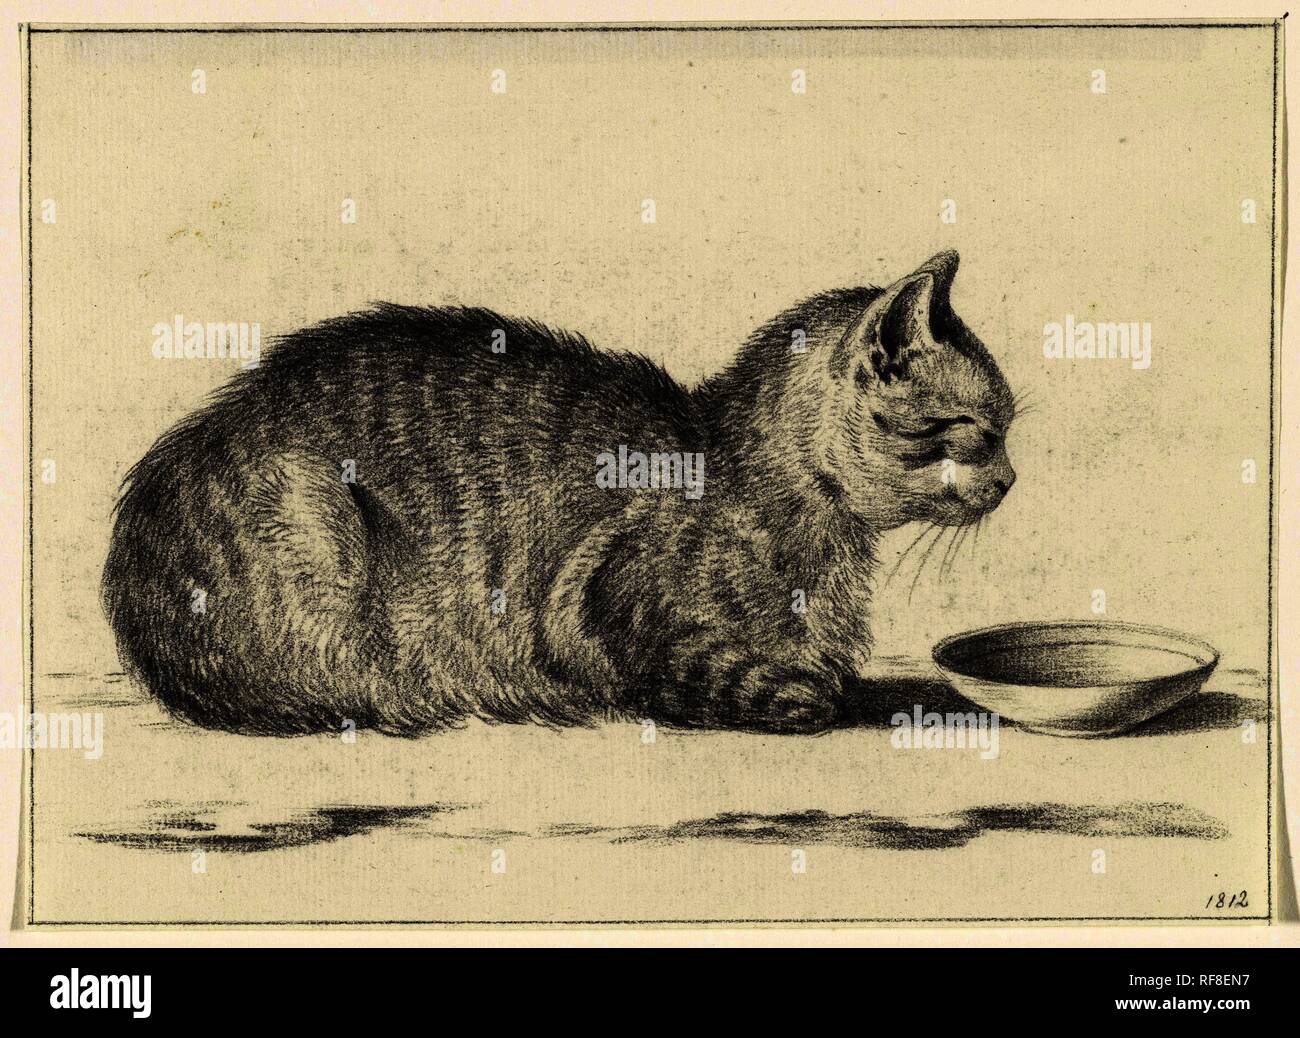 Lying cat, to the left, for a dish. Draughtsman: Jean Bernard. Dating: 1812. Measurements: h 141 mm × w 195 mm. Museum: Rijksmuseum, Amsterdam. Stock Photo